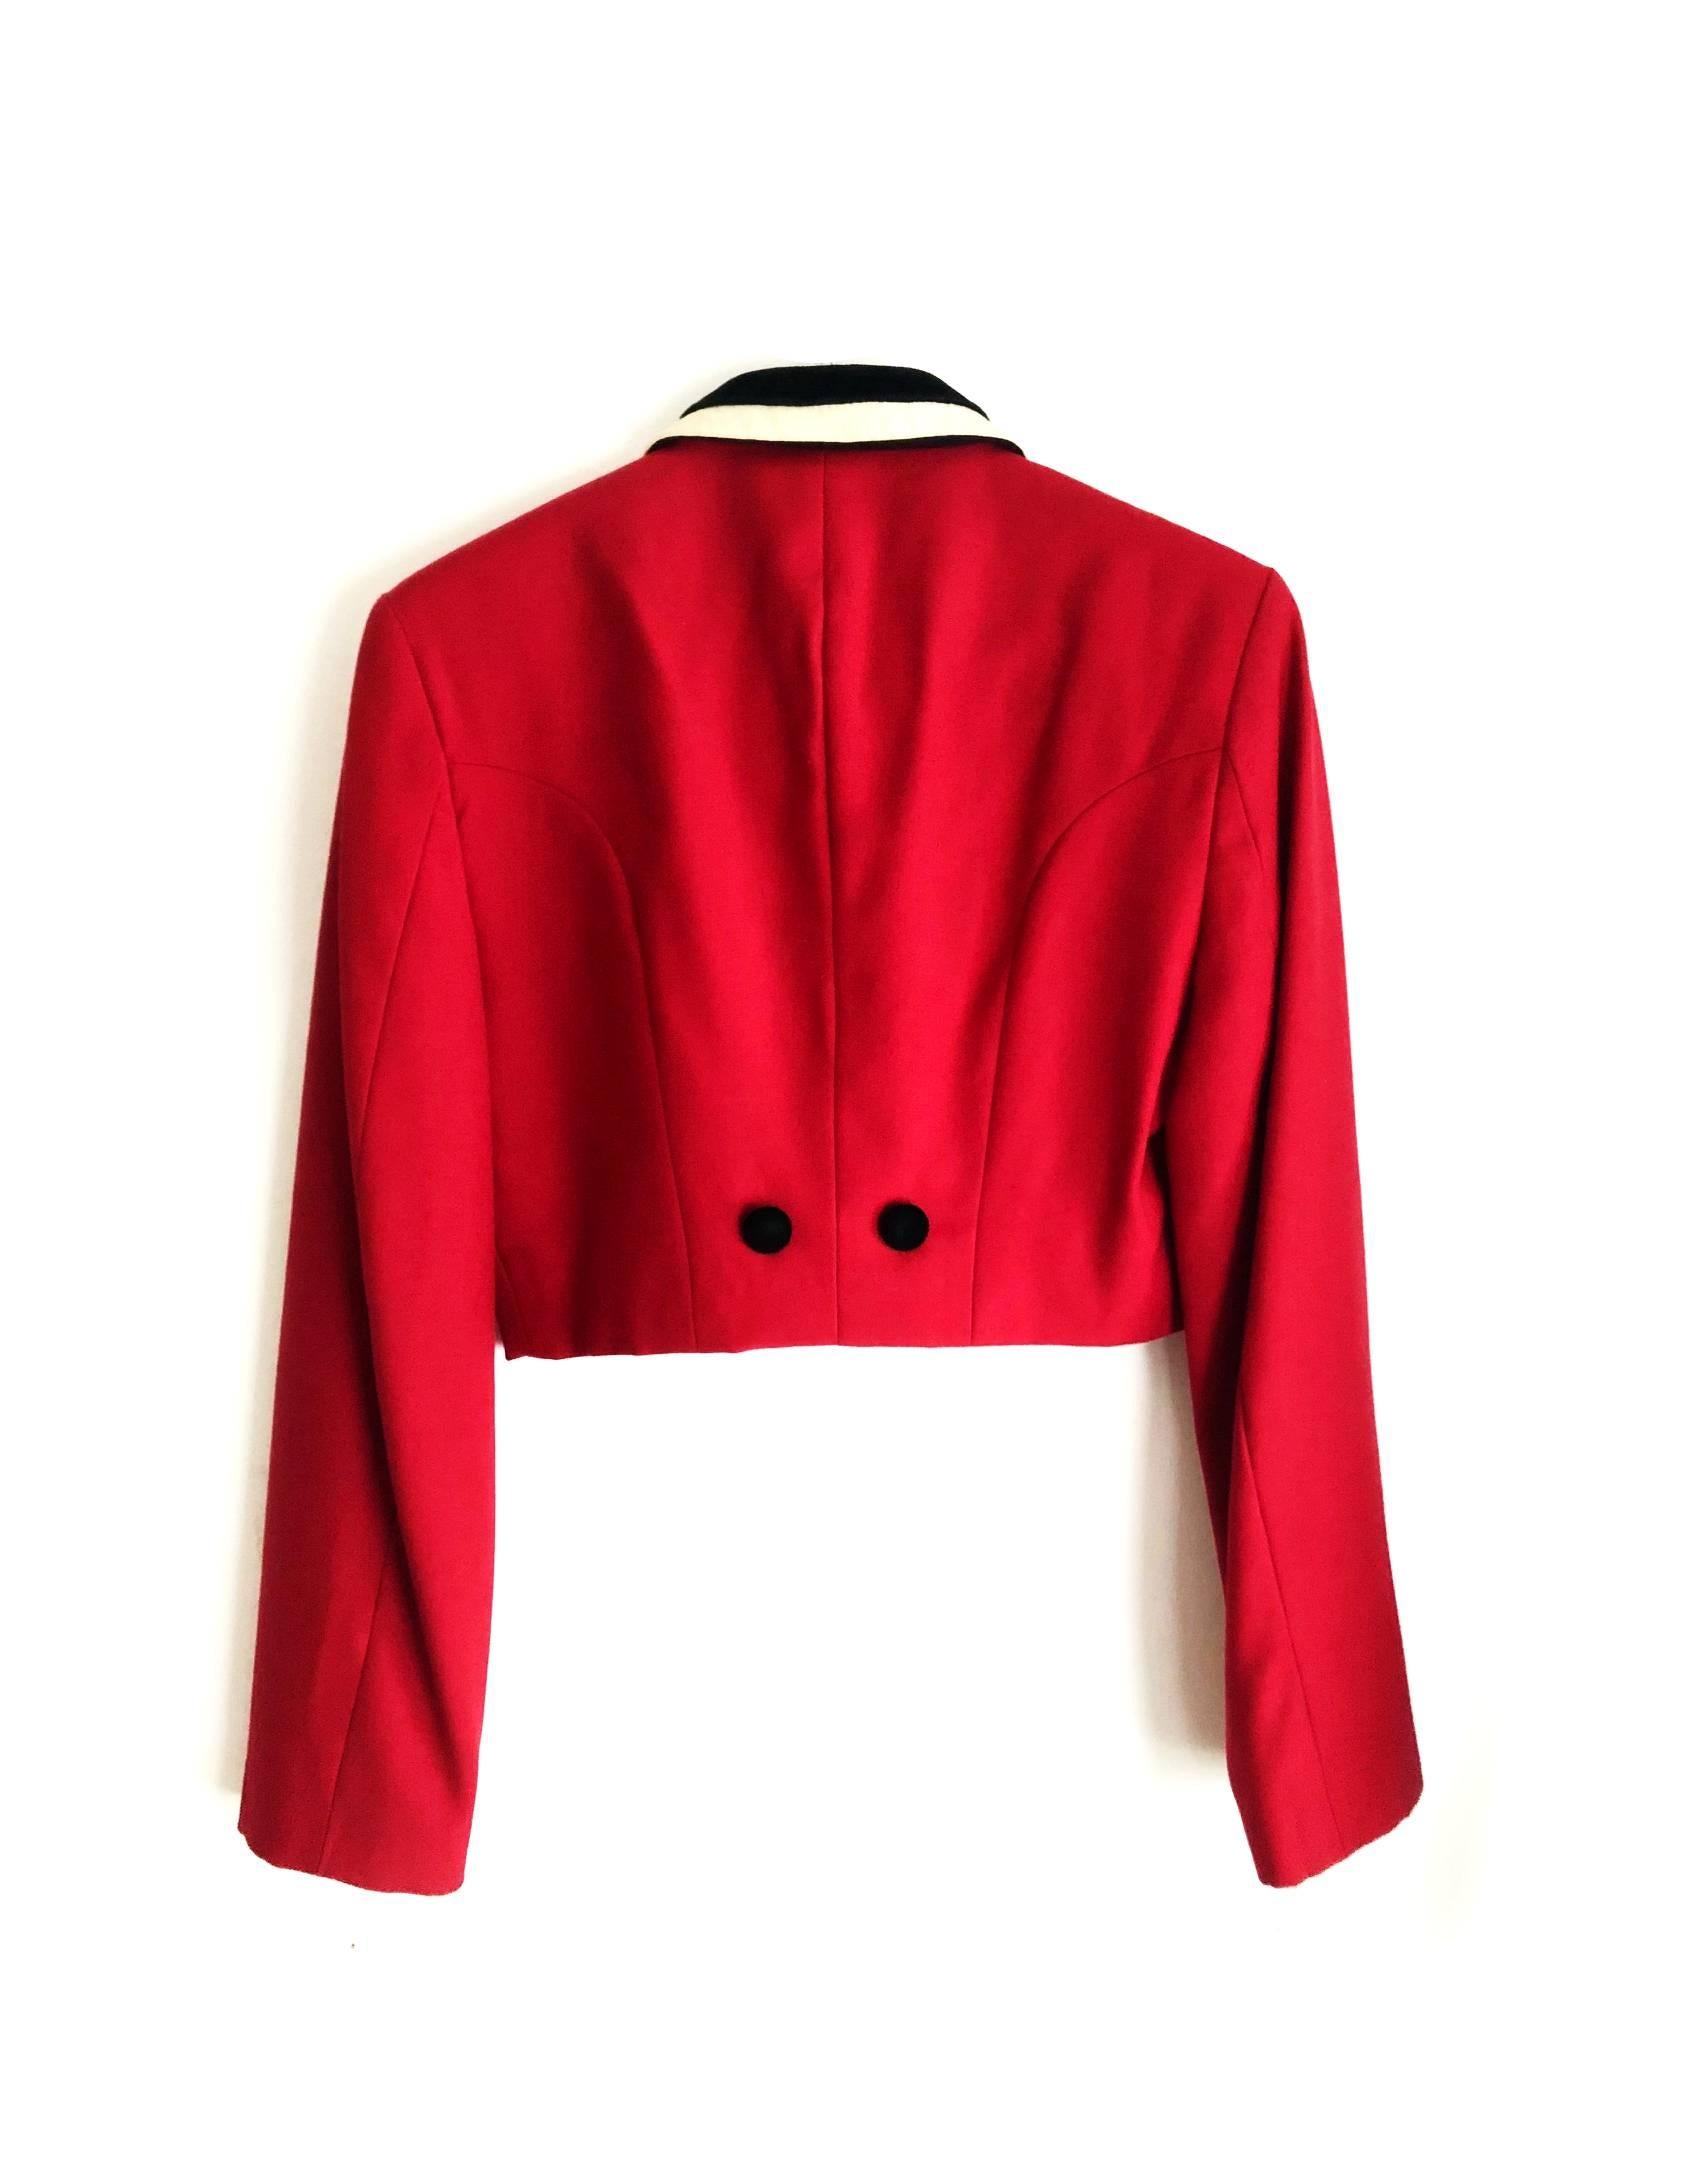 A statement blazer from Moschino in military tailored style, red wool, fake pockets with black velvet details, black and white silk stripe lining, Made In Italy 

Condition: 1980s/1990s, very good 

Size: 40 IT / 8 UK / 2-4 USA

Measurements: 
-